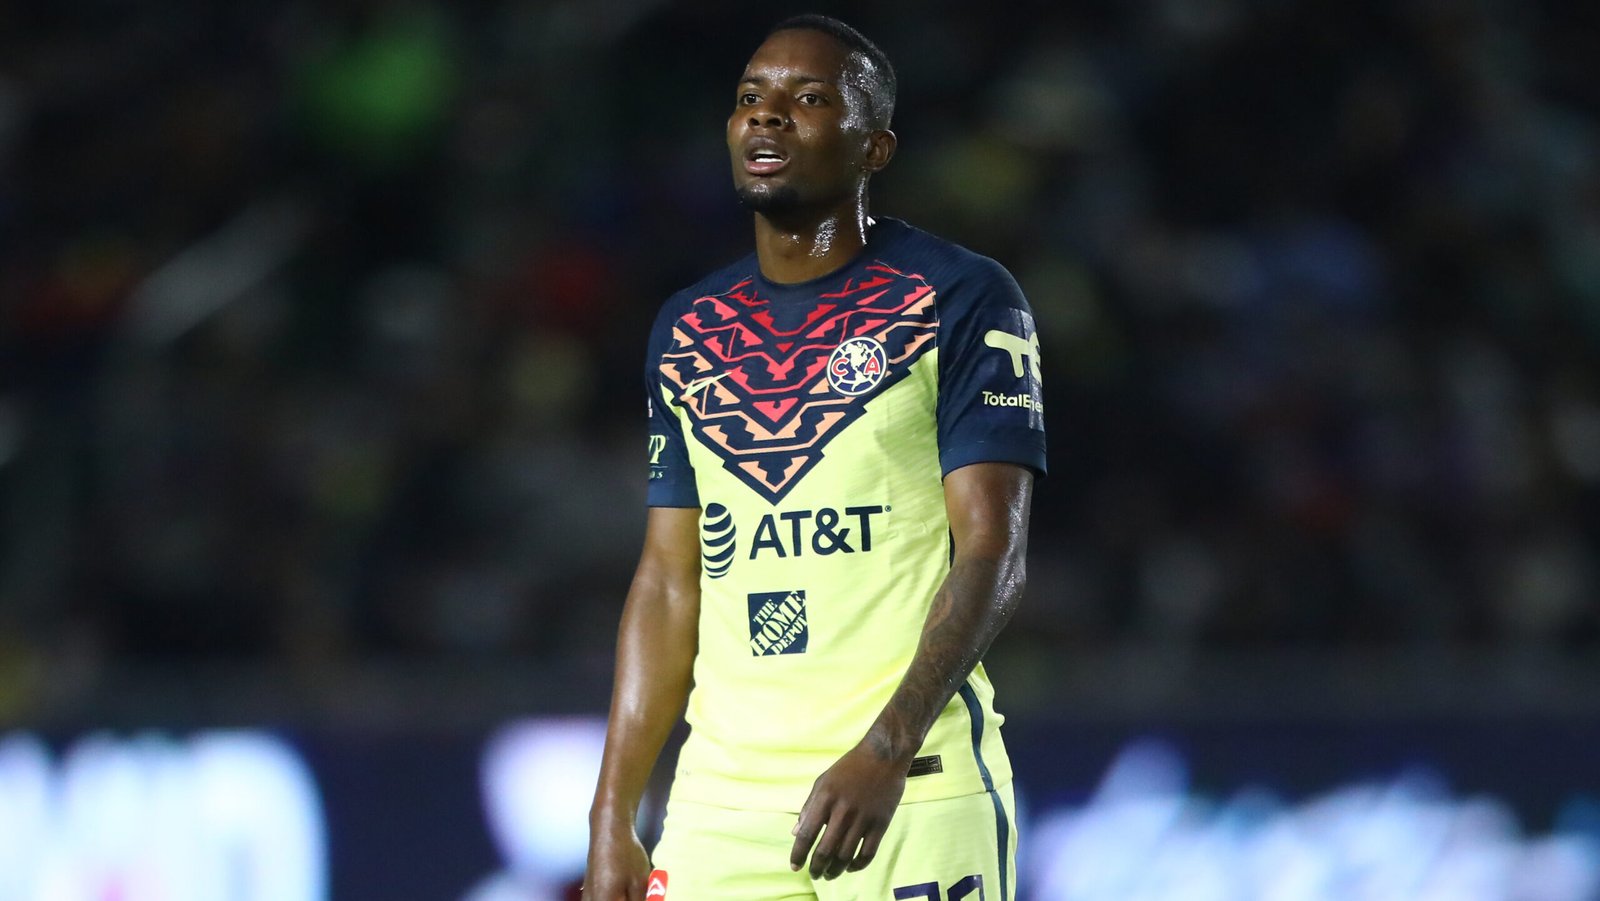 MAZATLAN, MEXICO - FEBRUARY 16: Juan Otero of America reacts during the 2nd round match between Mazatlan FC and America as part of the Torneo Grita Mexico C22 Liga MX at Kraken Stadium on February 16, 2022 in Mazatlan, Mexico. (Photo by Sergio Mejia/Getty Images)